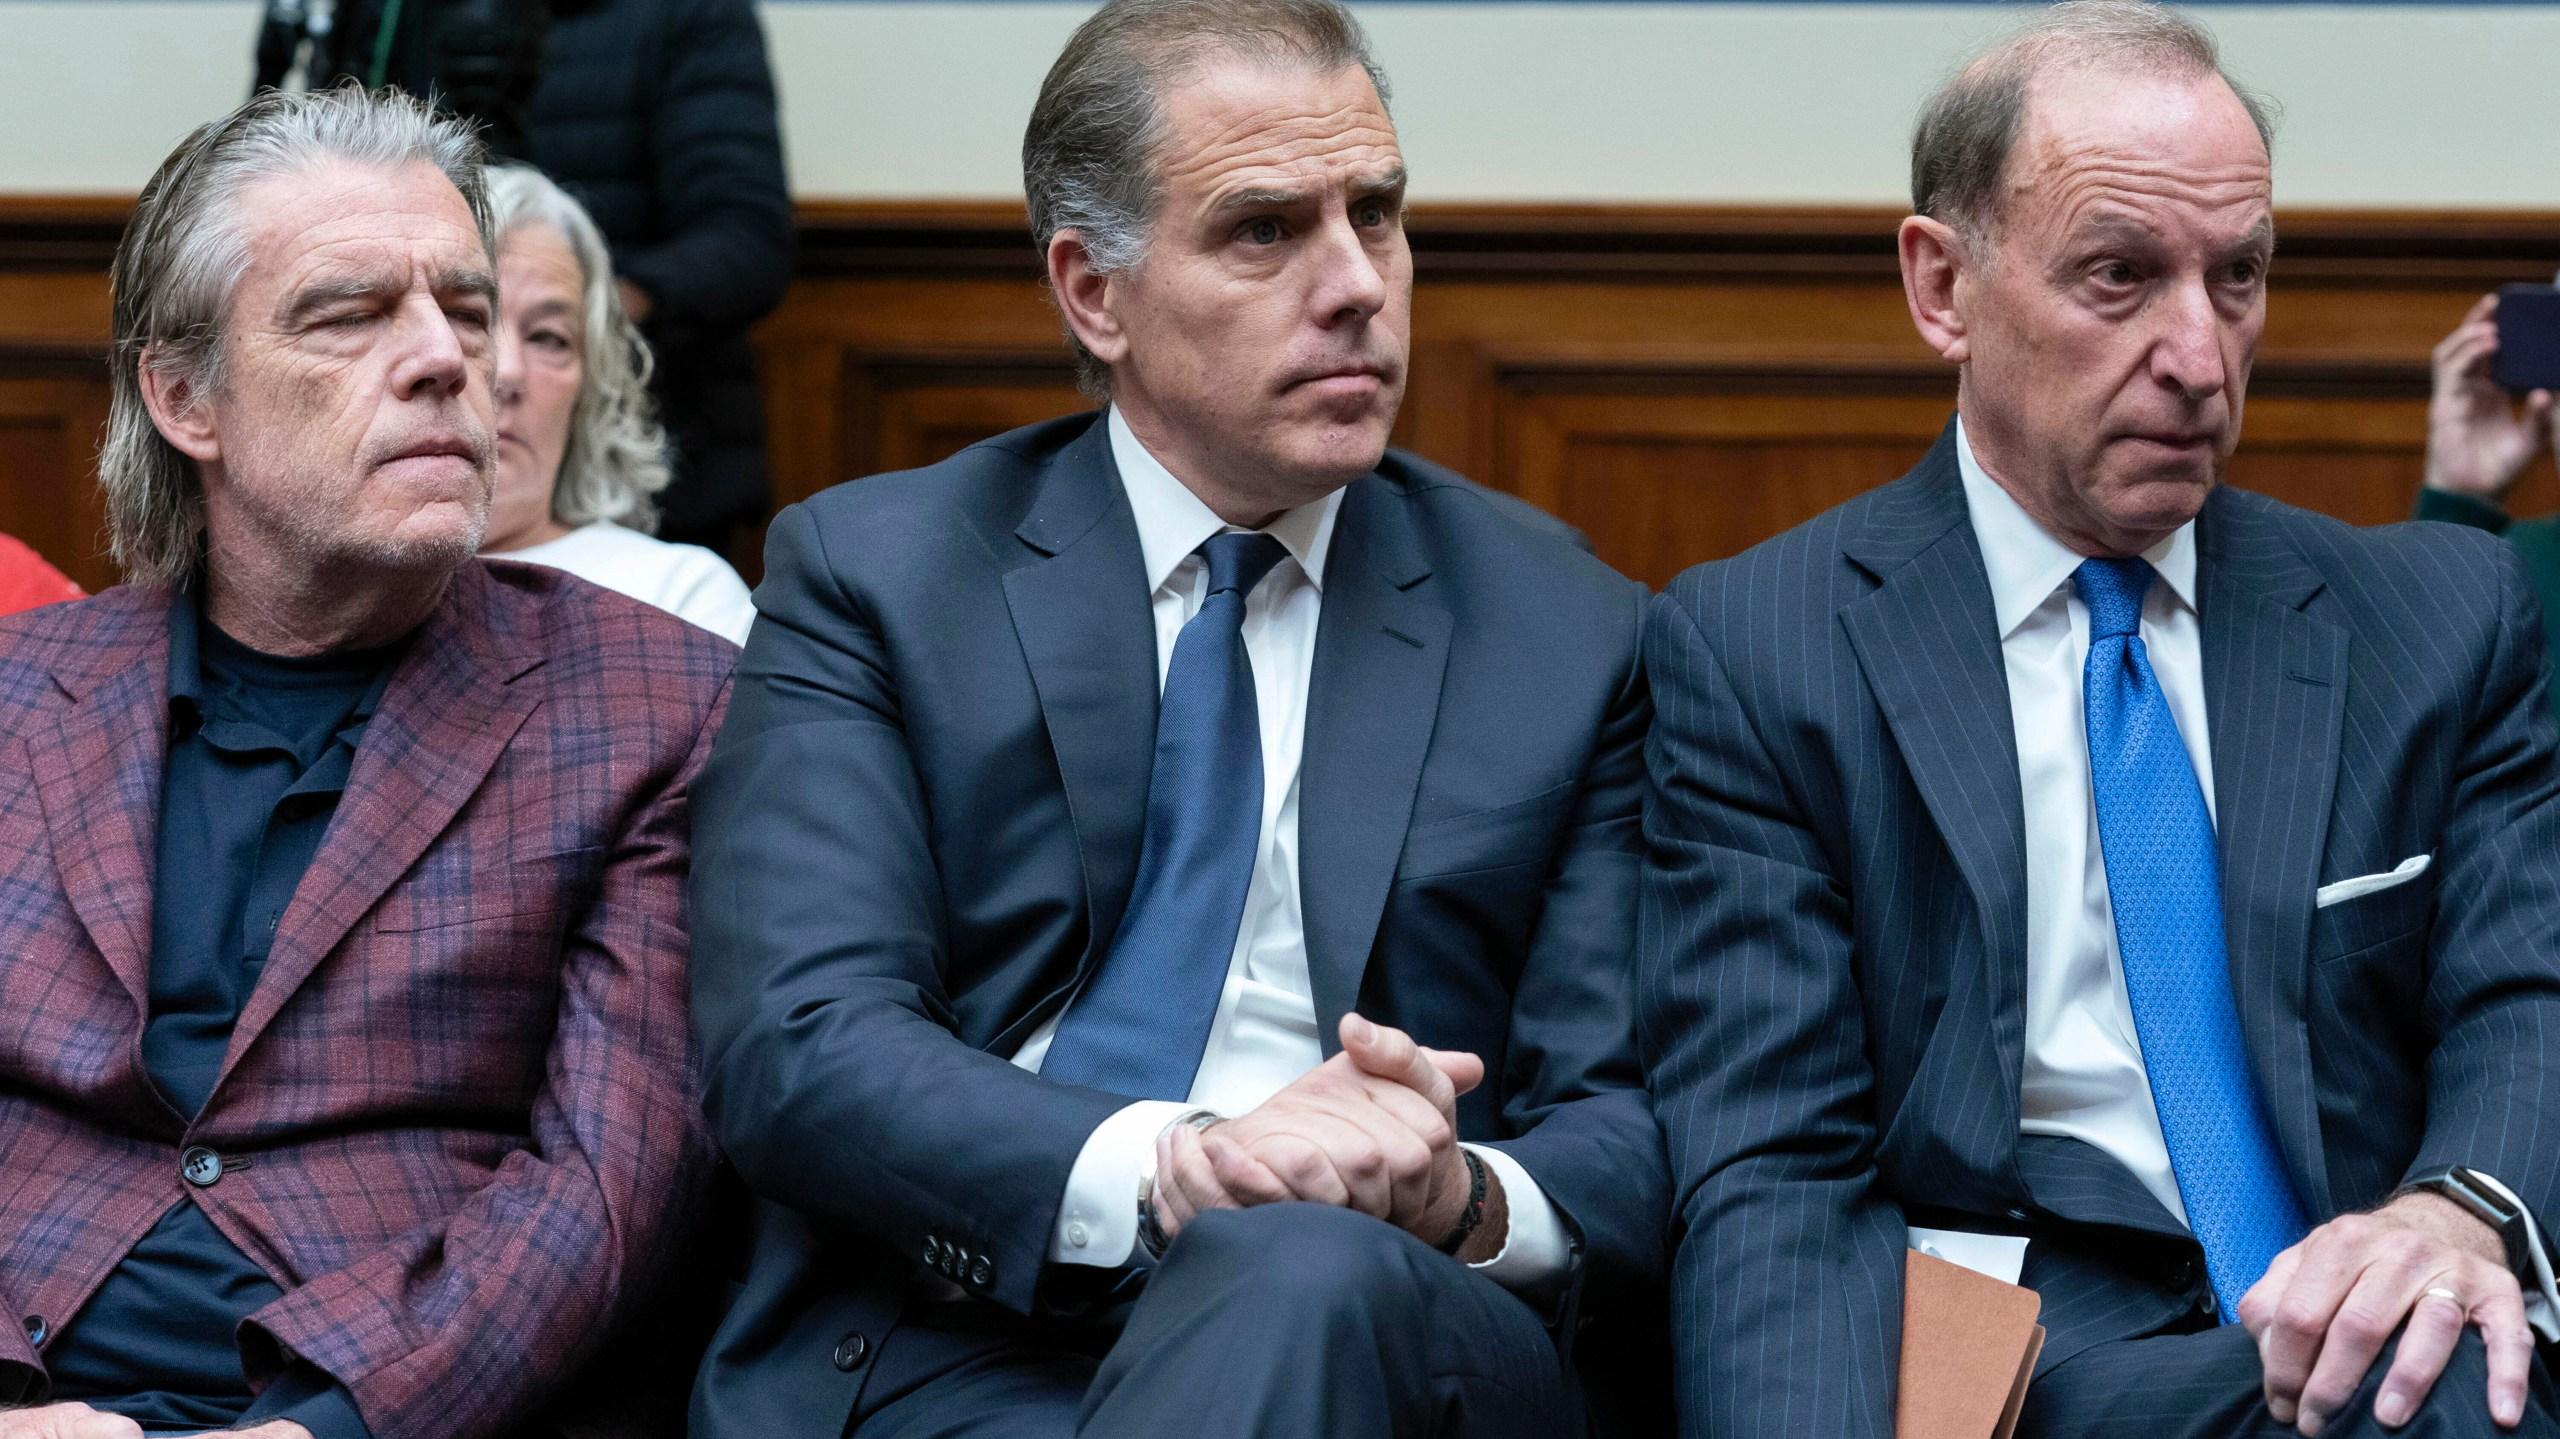 Republicans Pause Effort To Hold Hunter Biden In Contempt Say